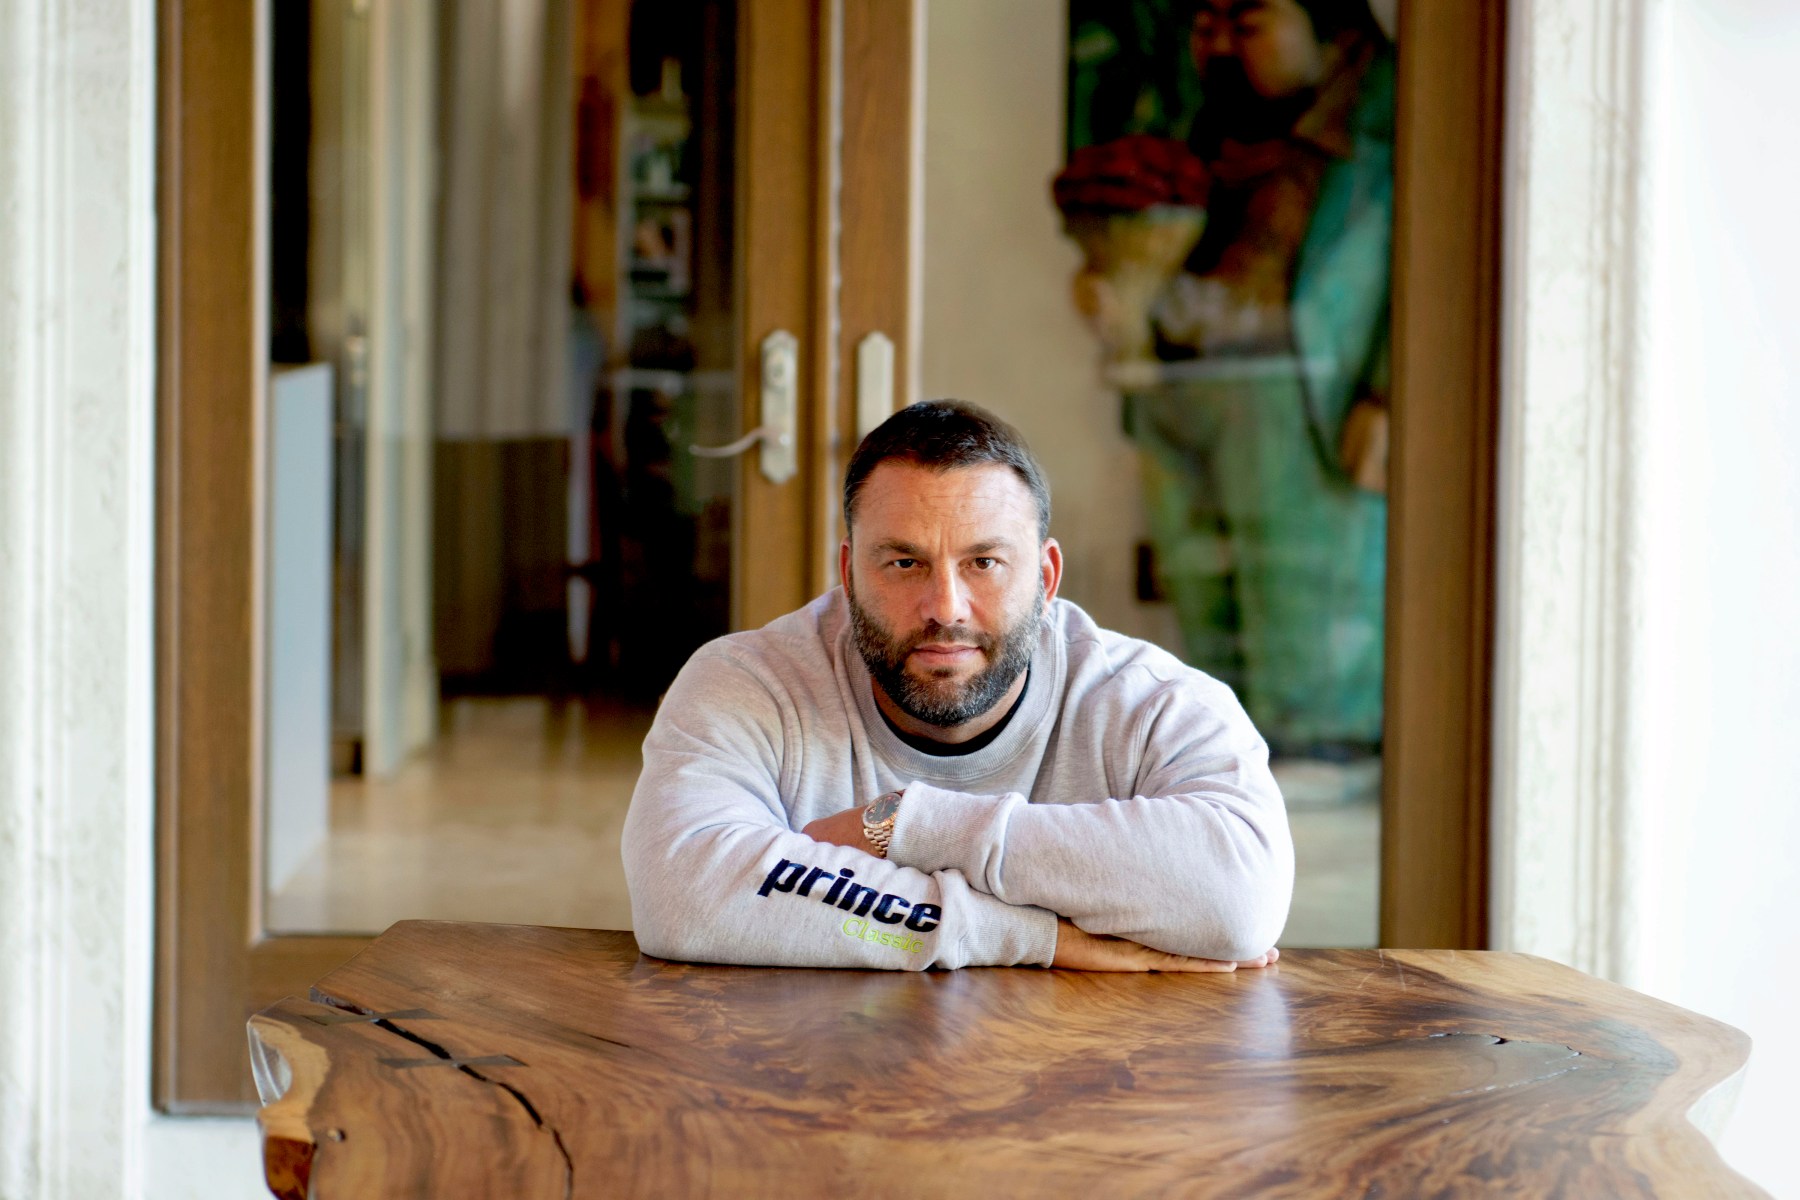 David Grutman outside on back patio. “I love this space,” he says. “I feel at home and I connect better with people, the energy over here.”